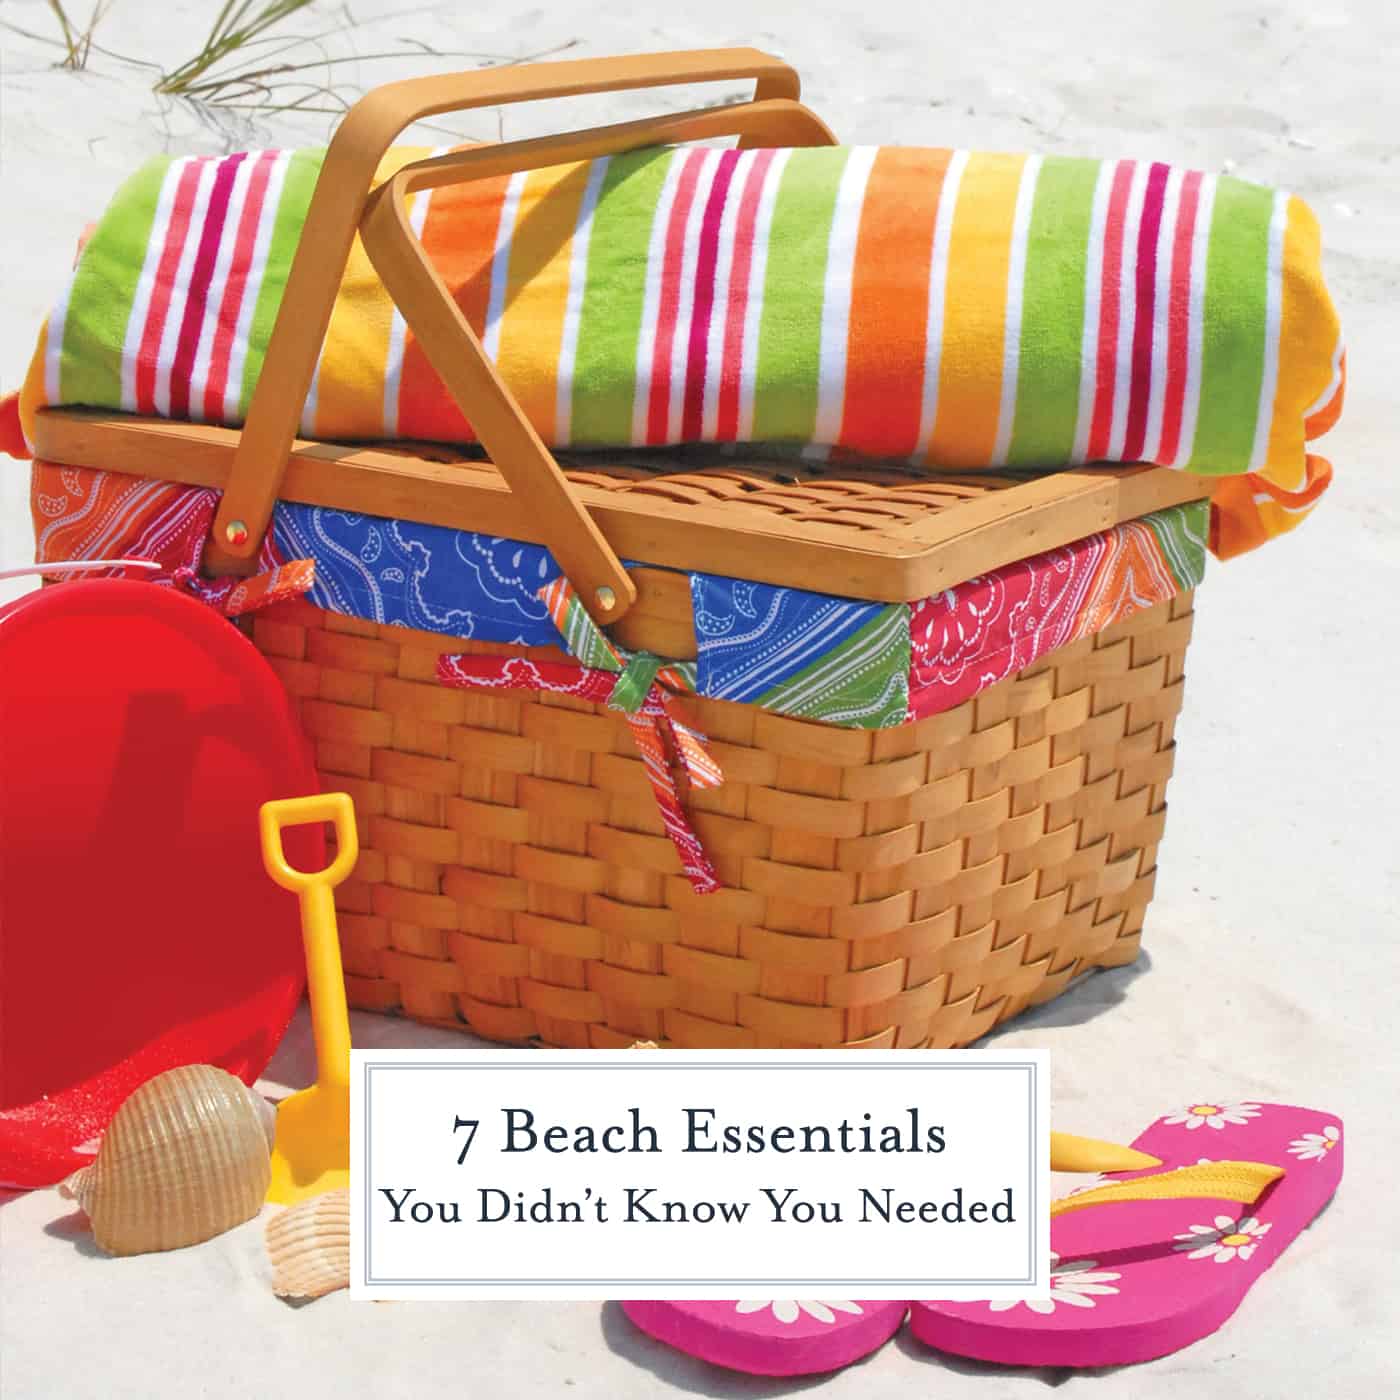 Taking a trip to the beach soon? You may think you have everything you needed, but these are 7 beach essentials you didn't know you needed! I bet you've never heard the tip in #4! www.savoryexperiments.com